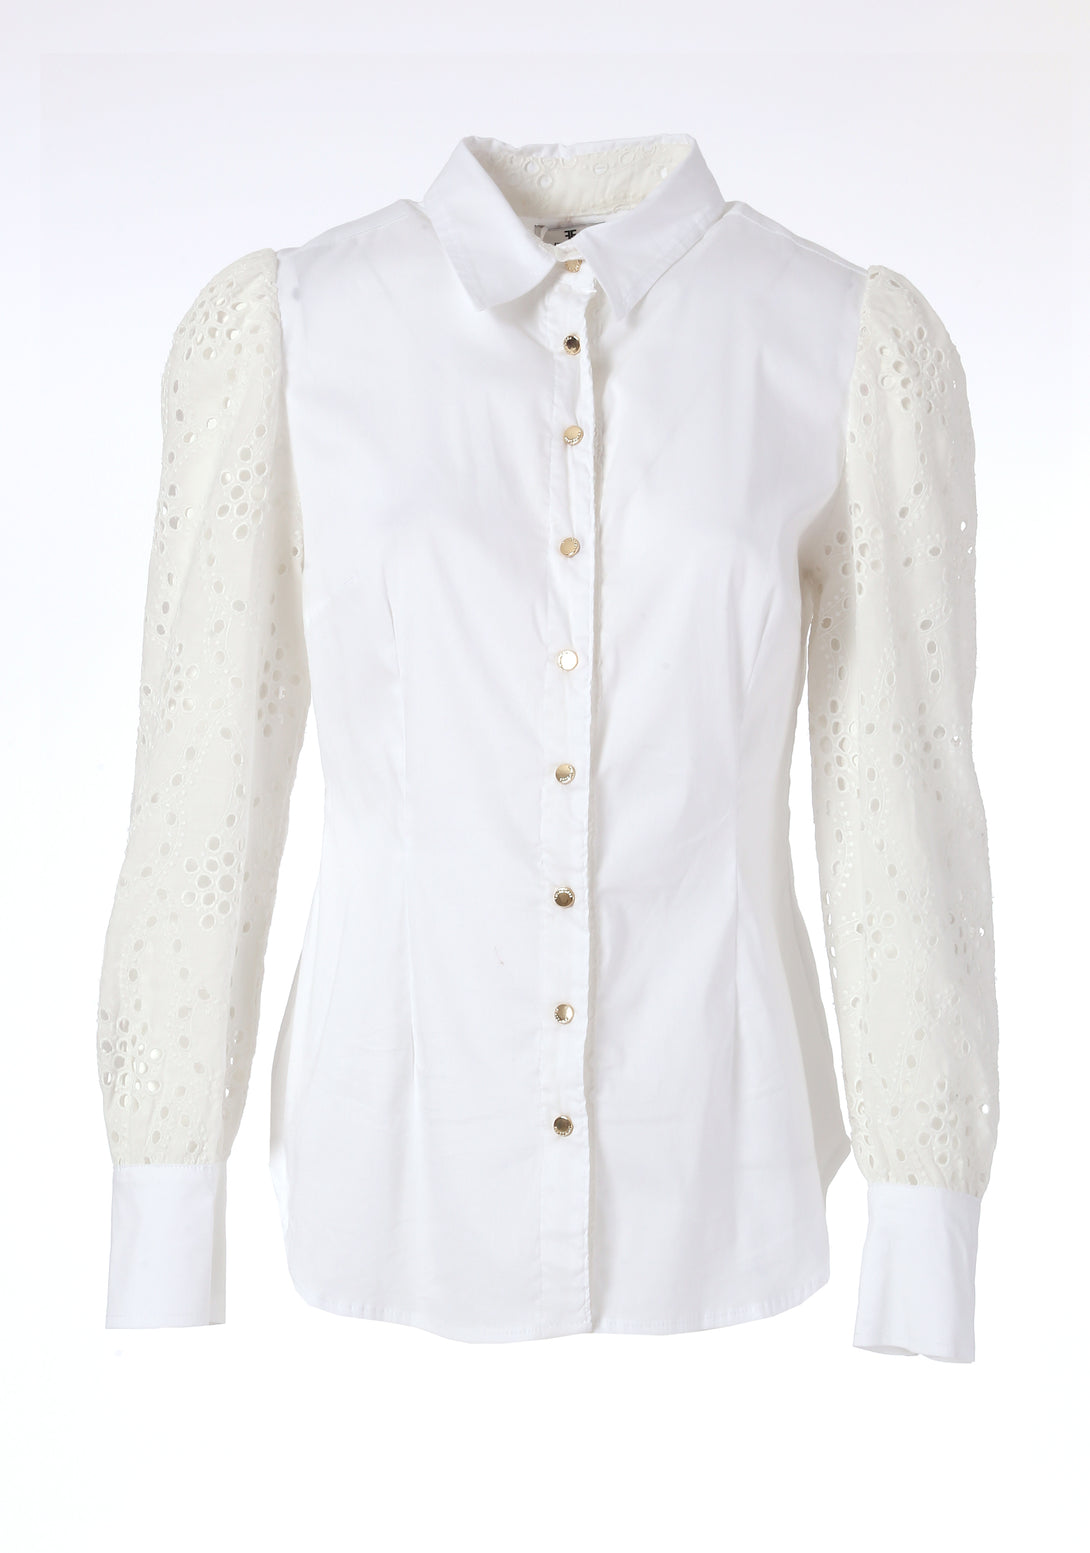 Shirt regular fit with long sleeves made in San Gallo lace